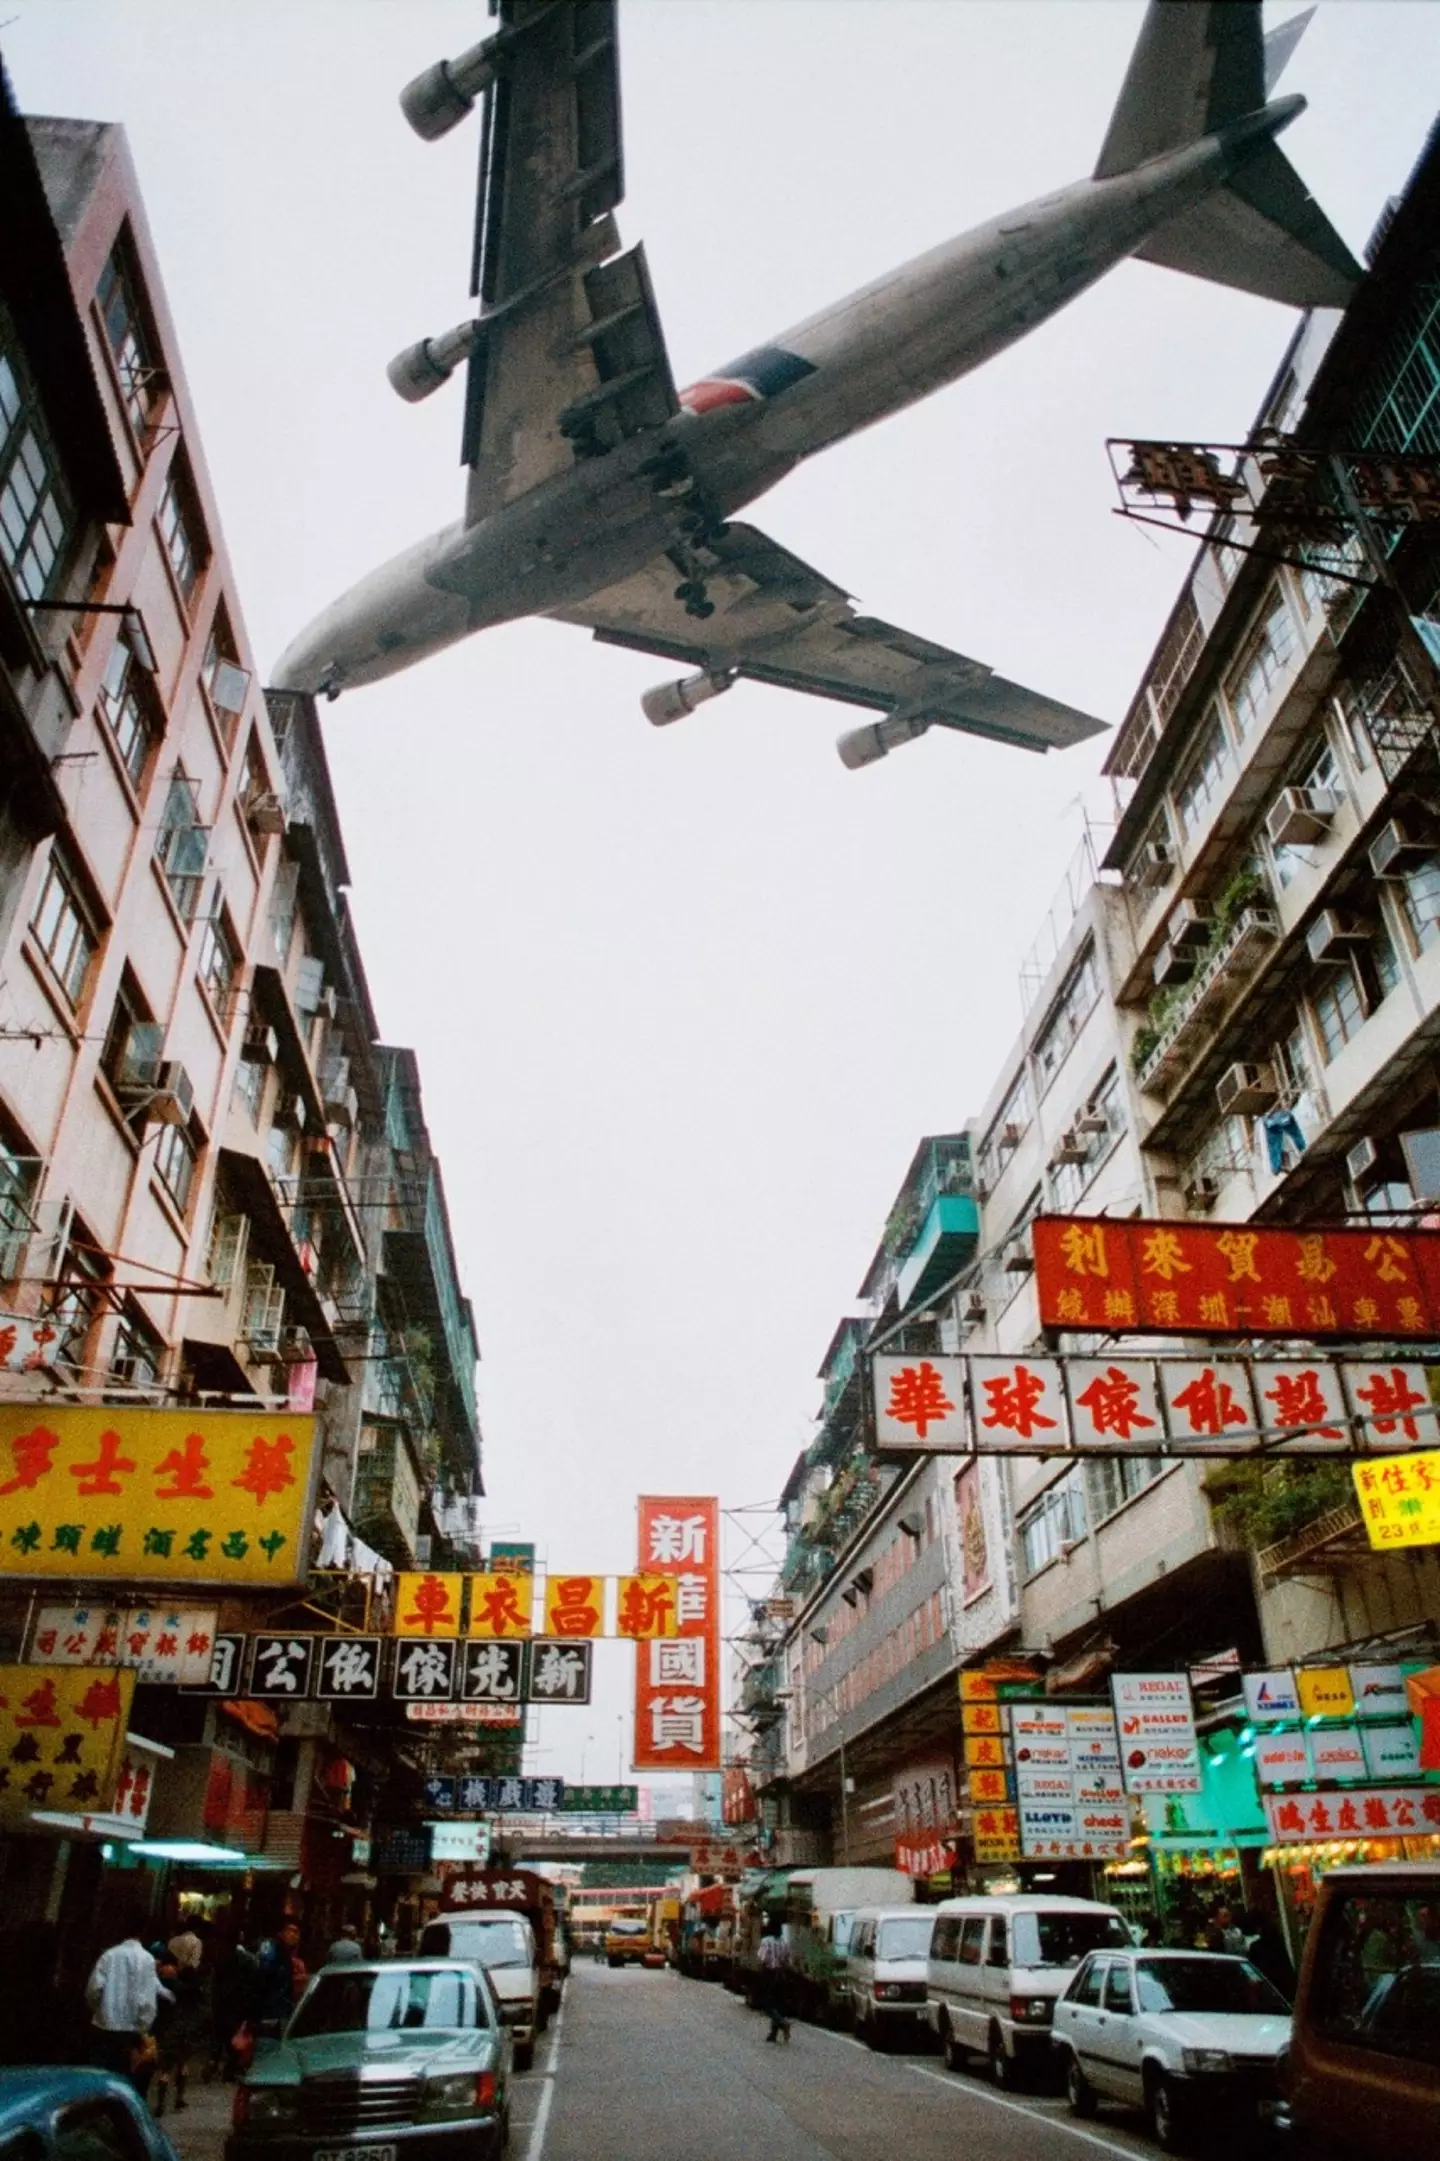 Kai Tak was in operation from 1925 to 1998.